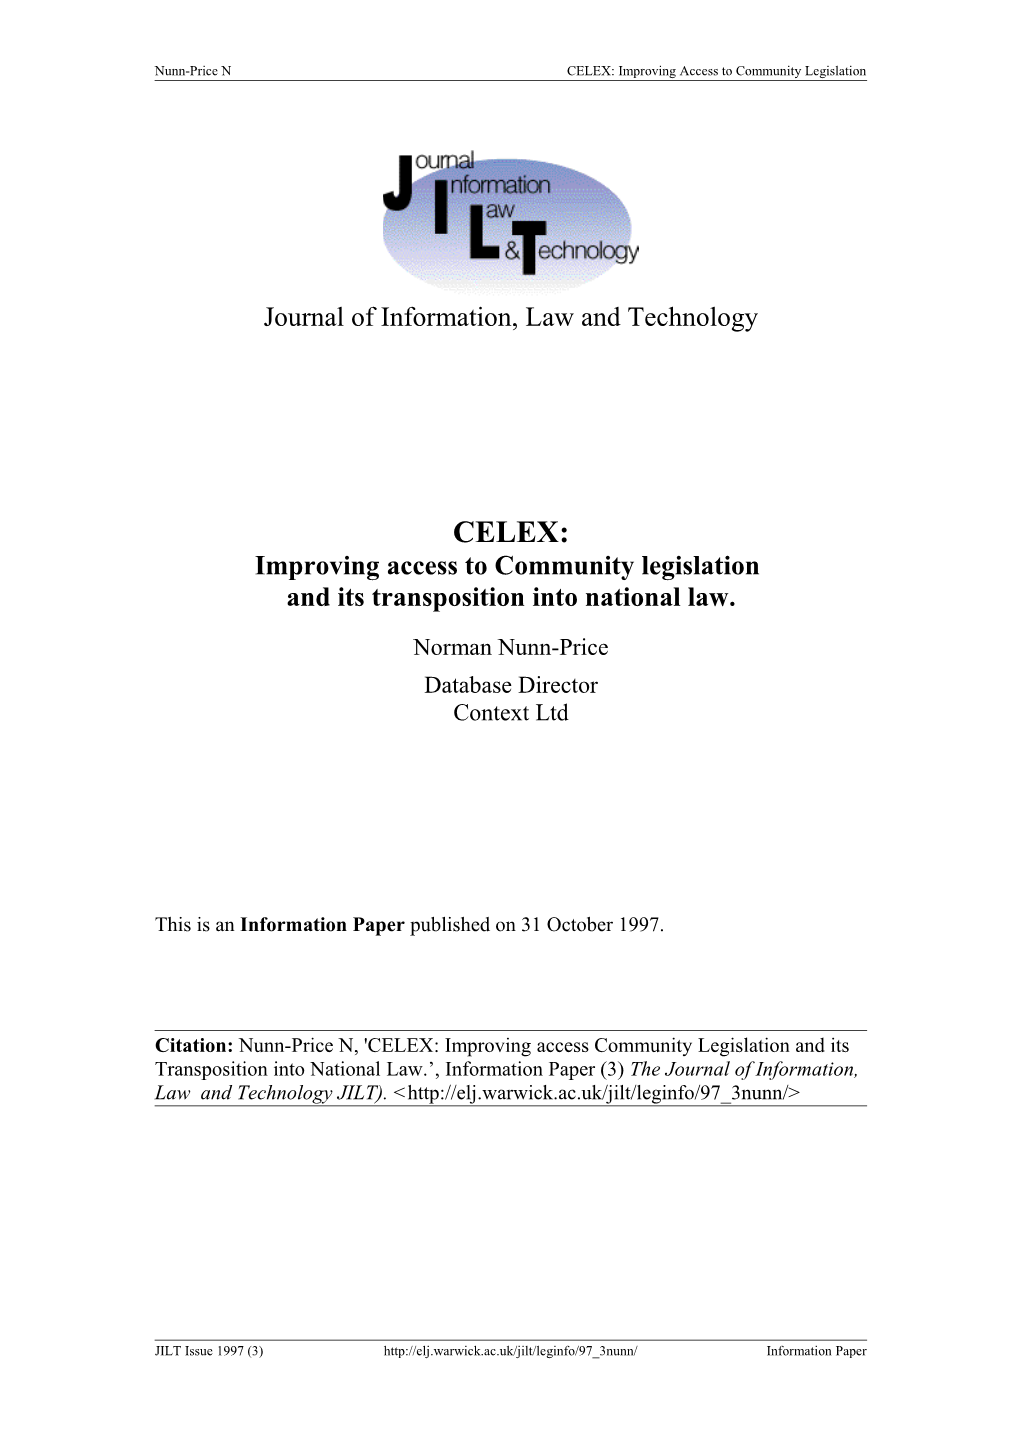 CELEX - Improving Access to Community Legislation and Its Transposition Into National Law